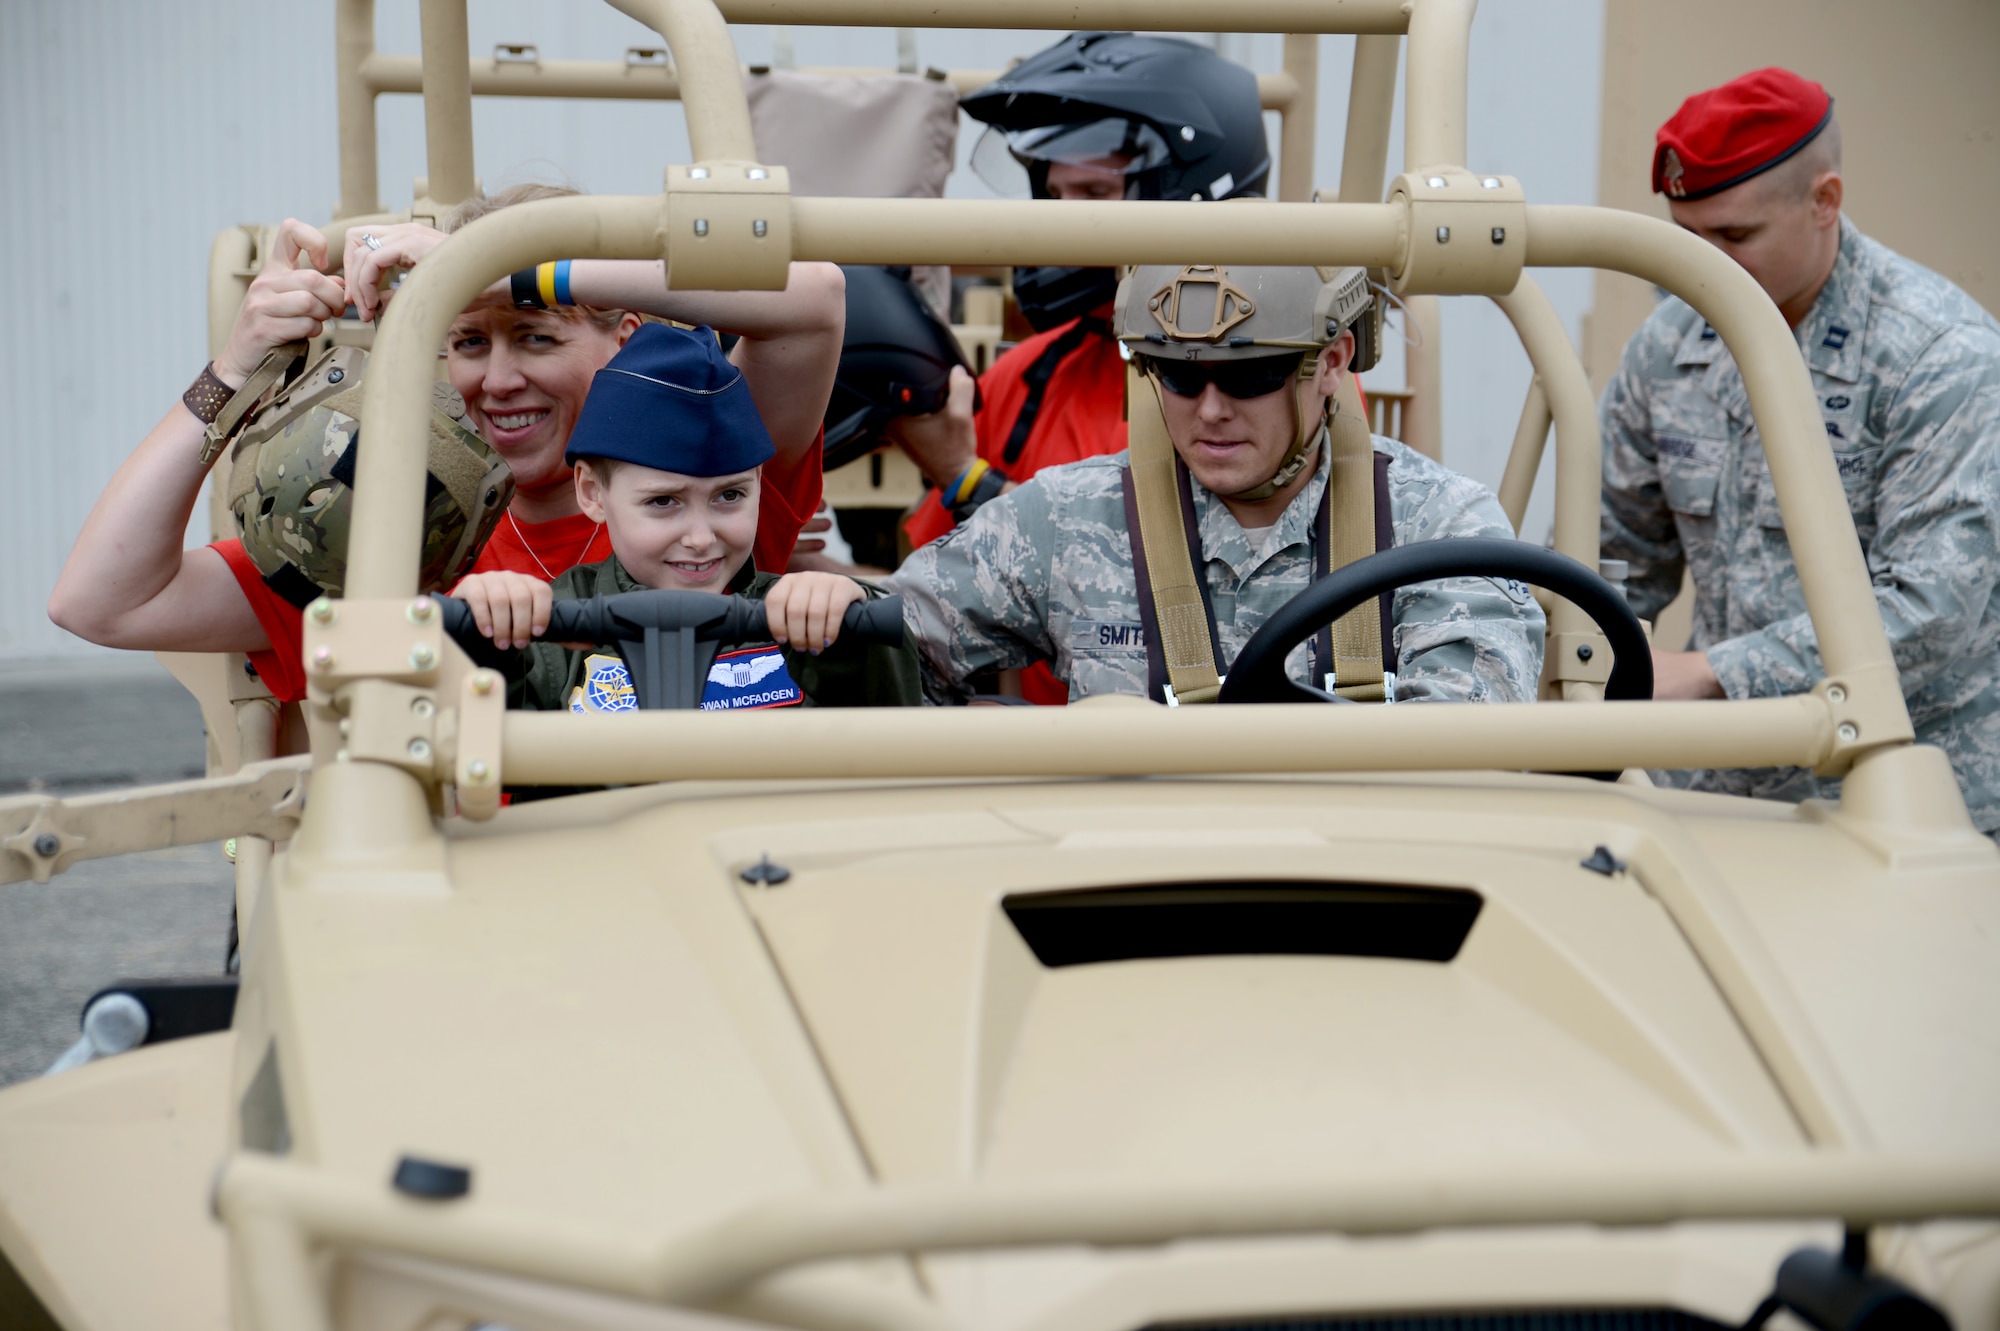 Ewan McFadgen, Pilot for a Day, rides in a light tactical all-terrain vehicle July 10, 2015, during his tour of Joint Base Lewis-McChord, Wash. Along his tour, McFadgen and his family learned about the various missions and responsibilities of the squadrons on McChord Field. (U.S. Air Force photo/Airman 1st Class Keoni Chavarria)